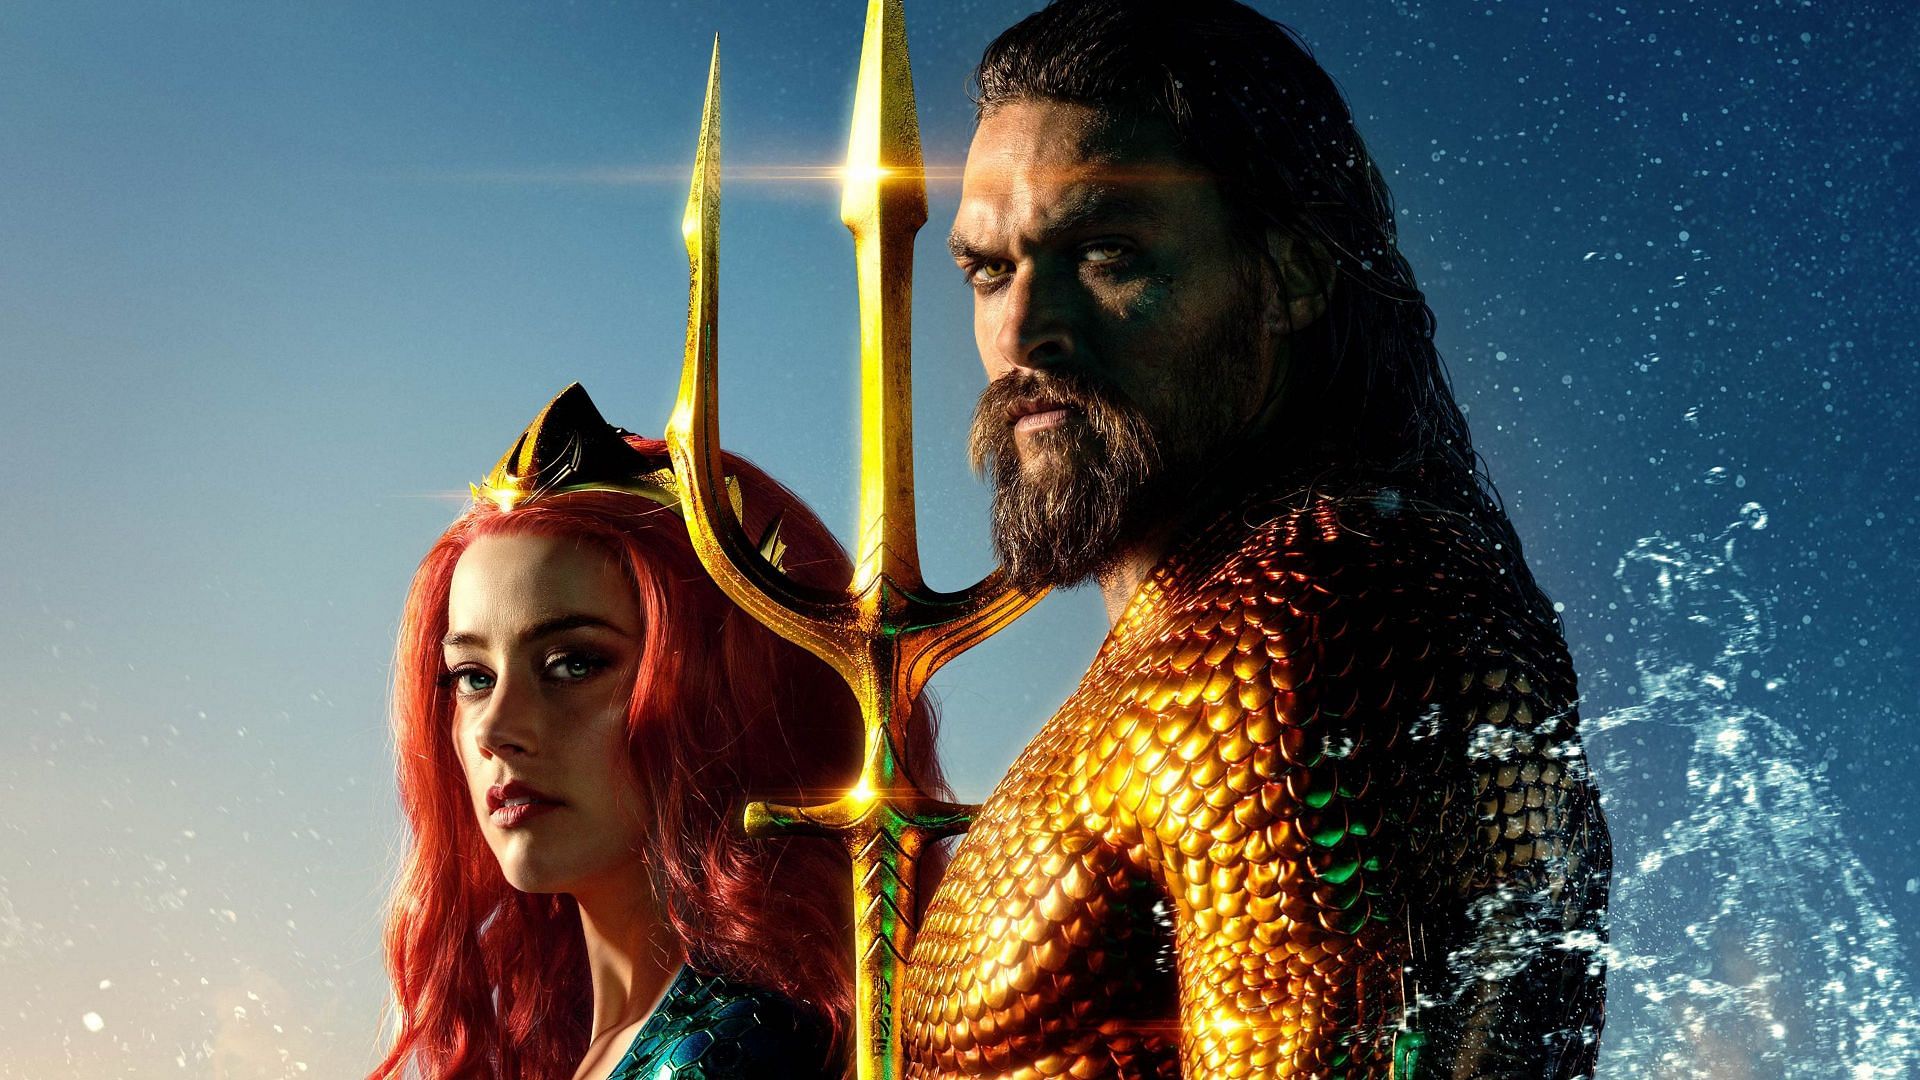 Warner Bros. Discovery has announced the highly-anticipated sequel to Aquaman. (Image via DC)